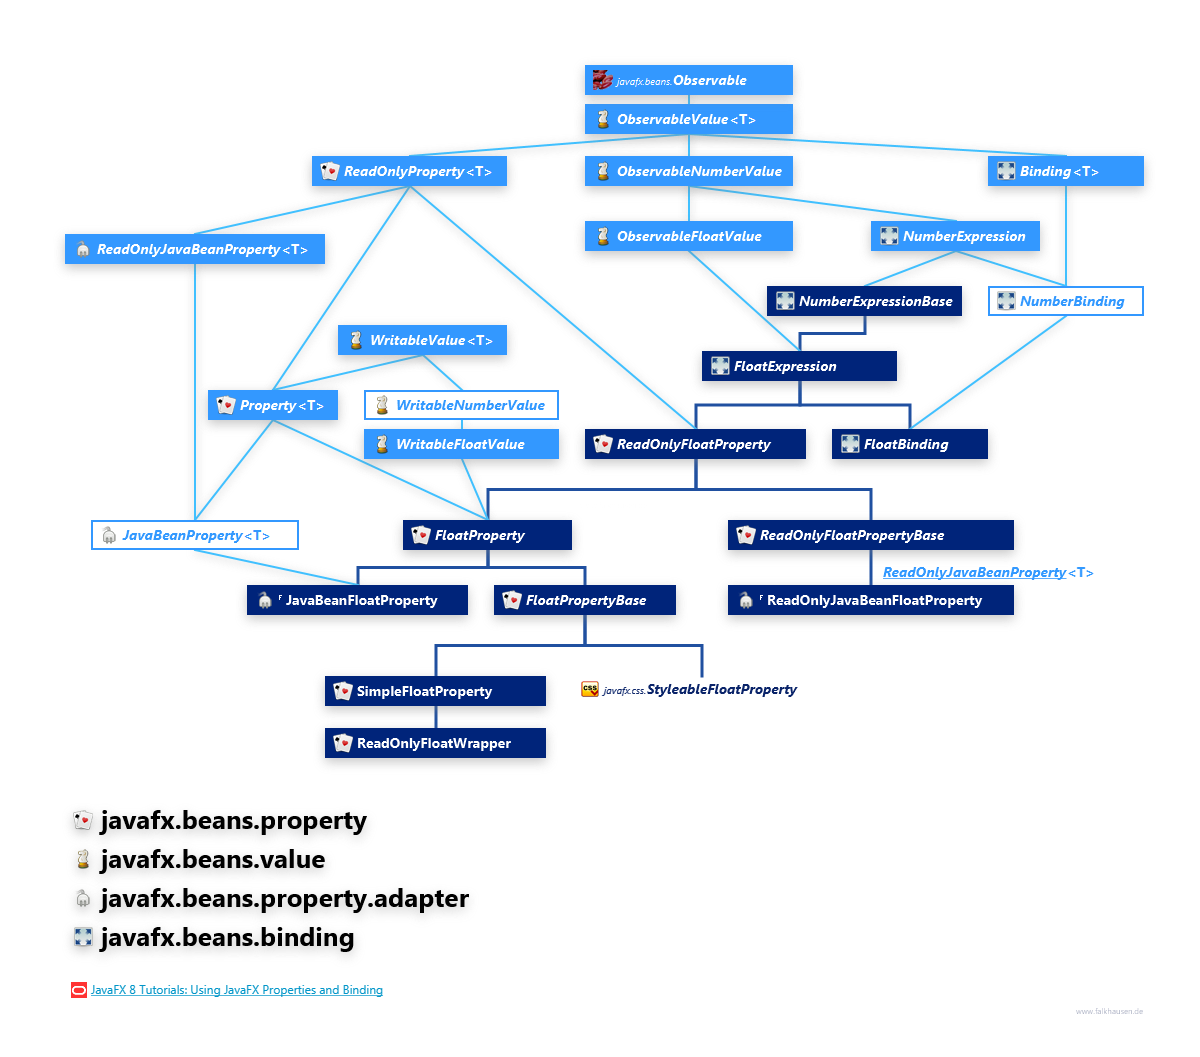 javafx.beans.property javafx.beans.value javafx.beans.property.adapter javafx.beans.binding FloatProperty Hierarchy class diagram and api documentation for JavaFX 8